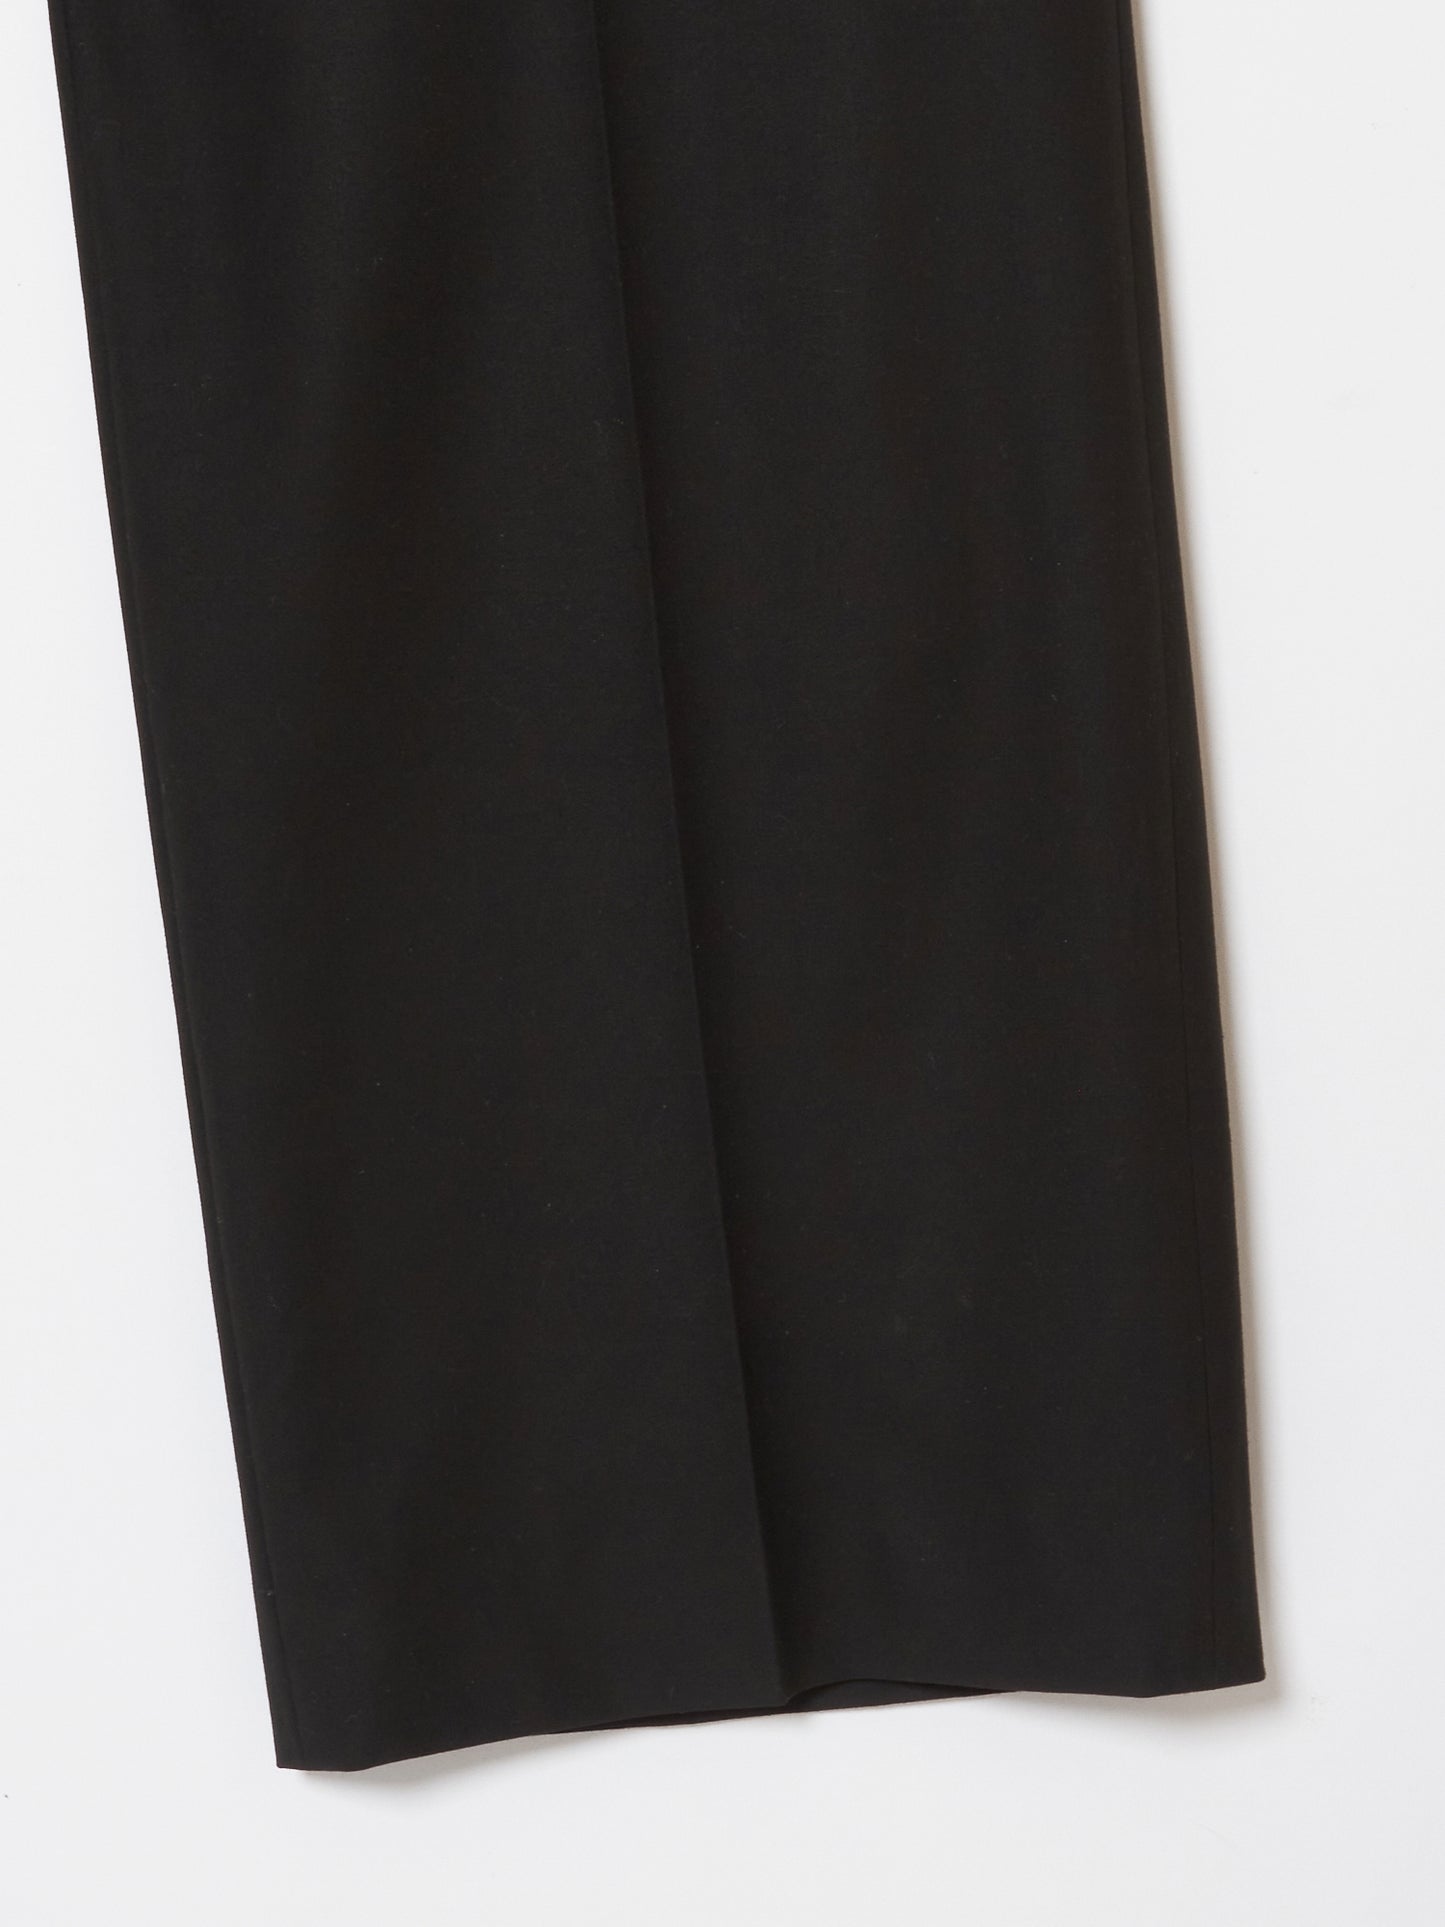 side open black pants【Delivery in January 2023】